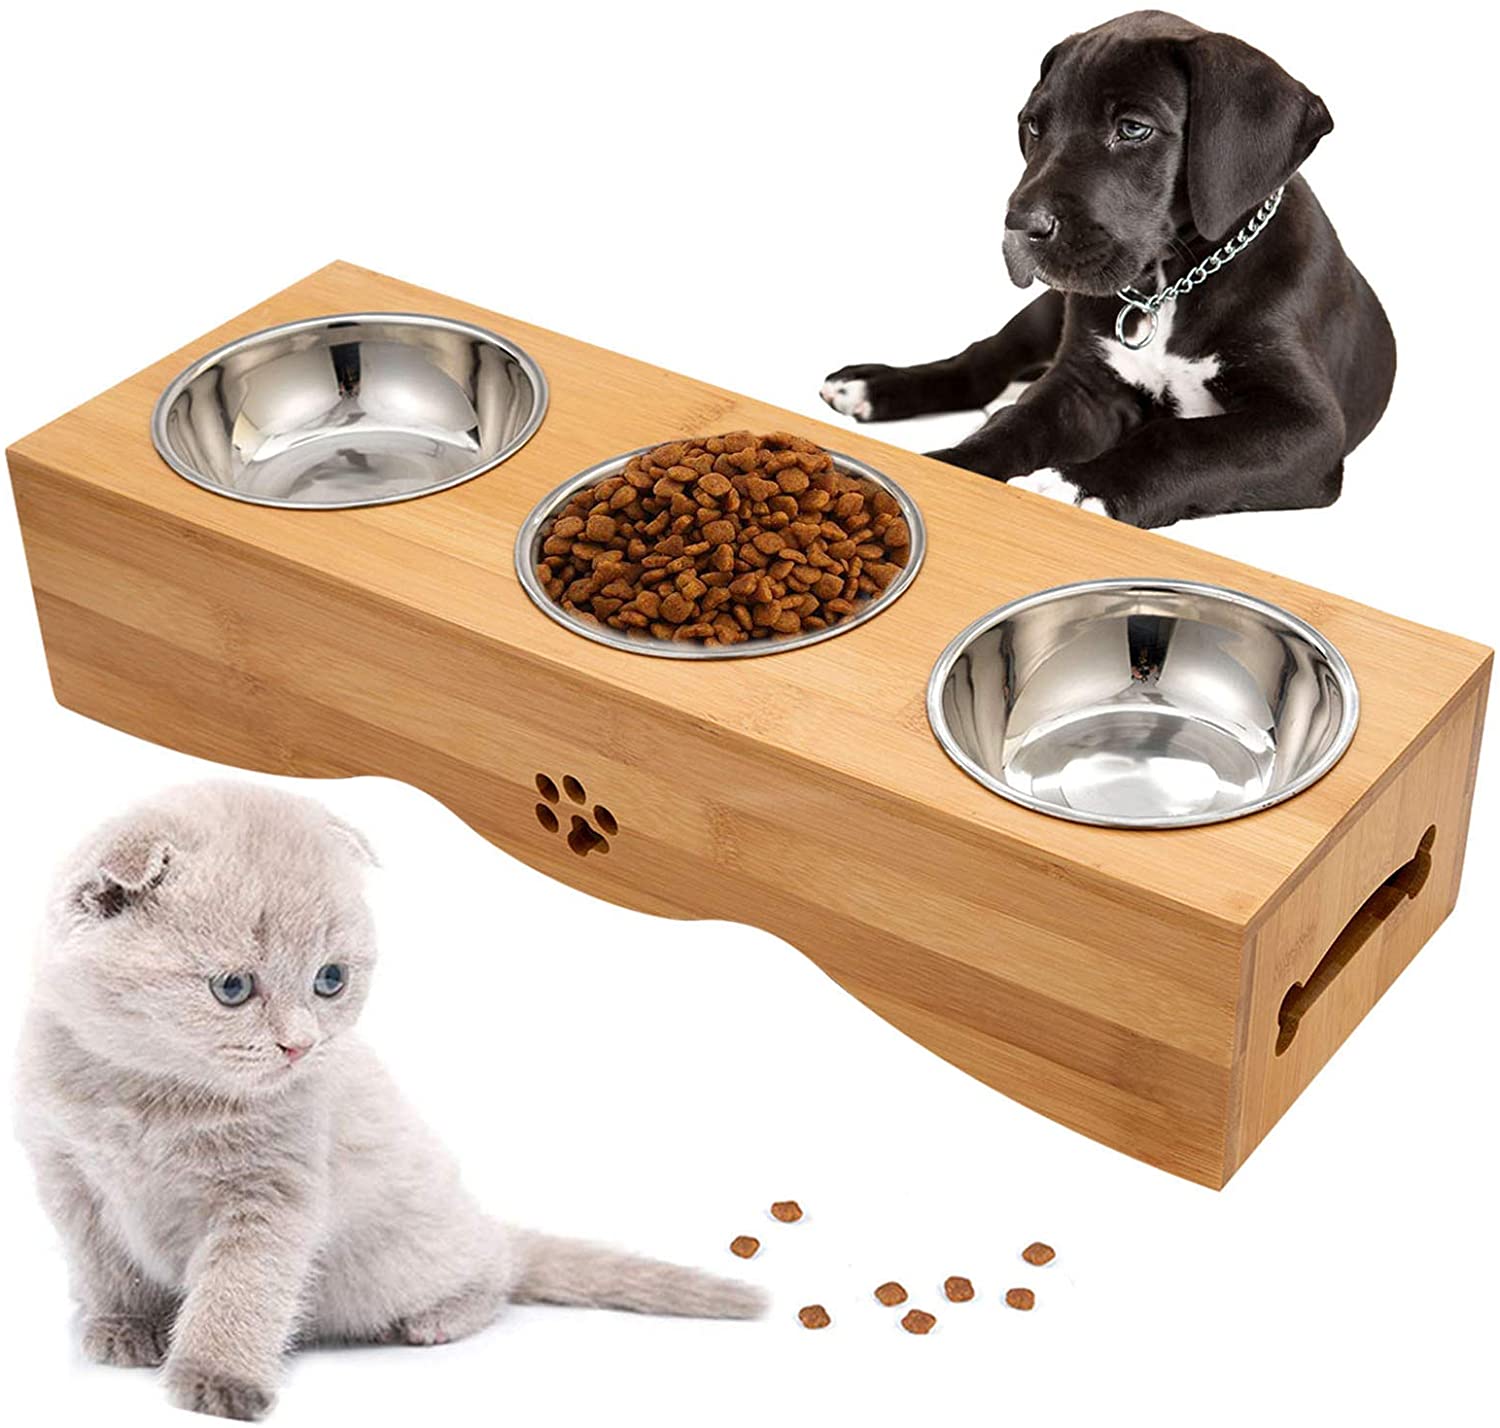 2017 wholesale priceGlass Coaster -  hot selling Pet Dog Cat Bowls Stand Height Feeding Station with stainless pet bowl – Shunstone